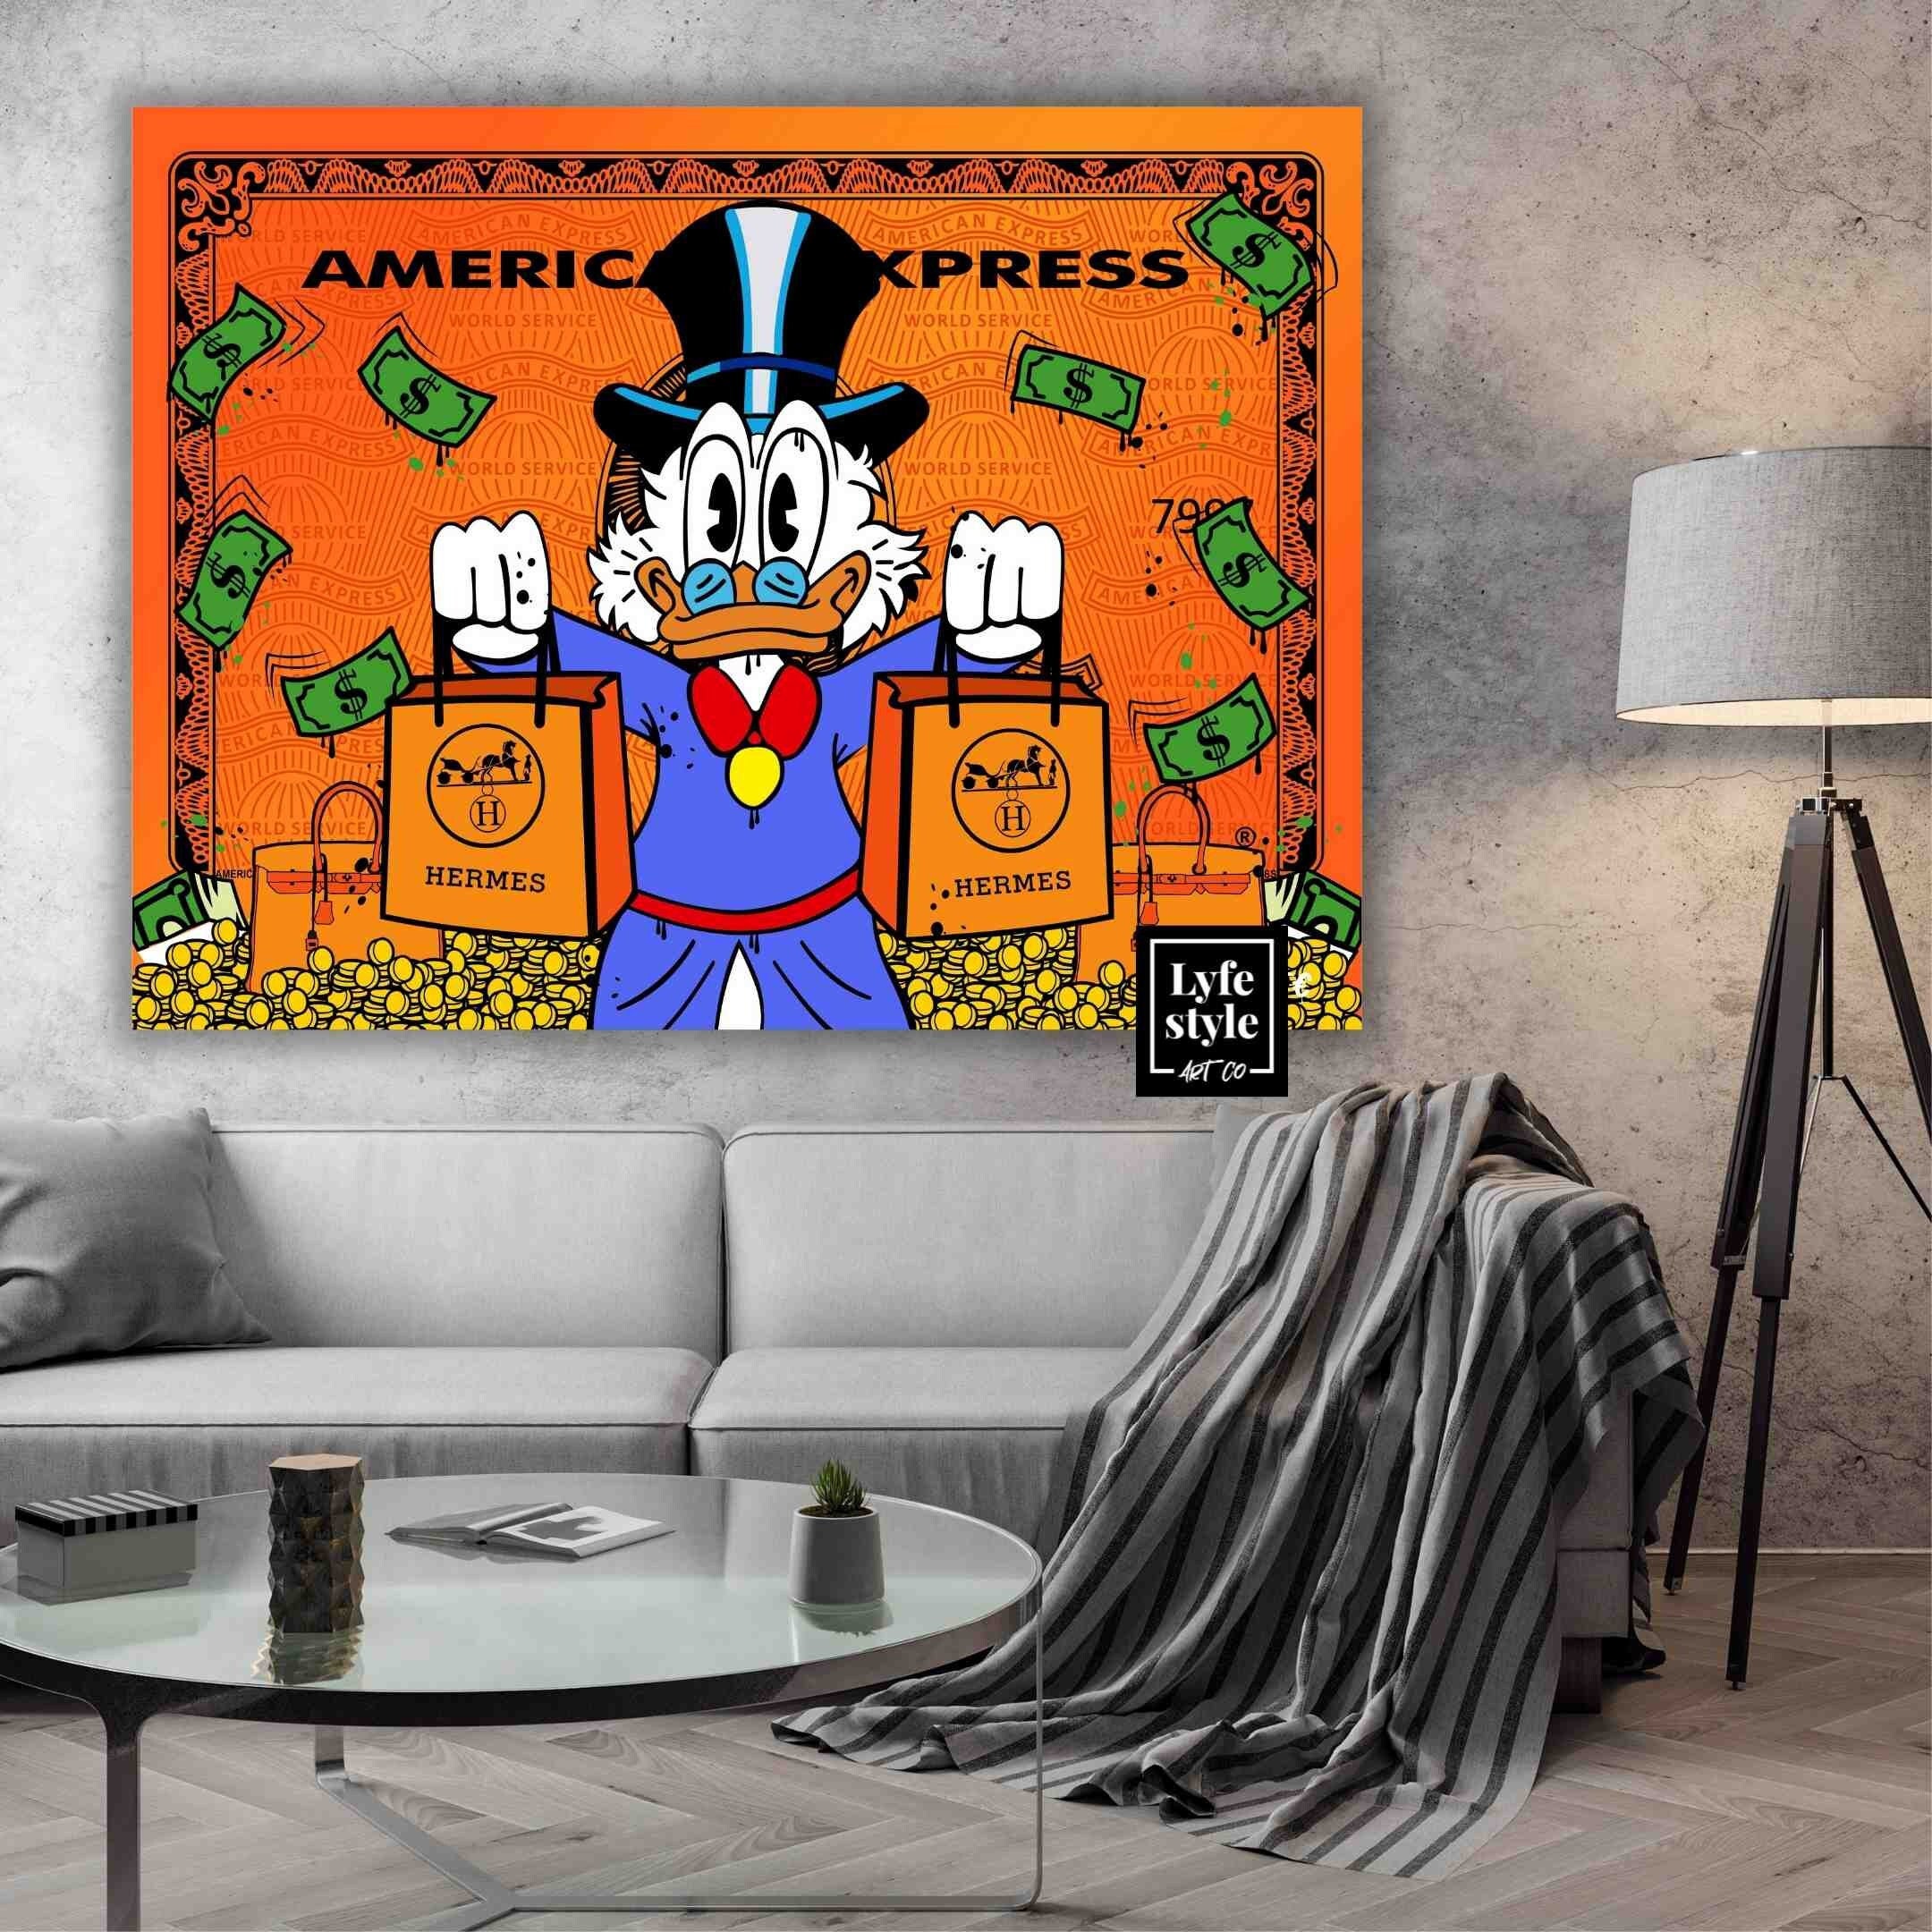 Alec Monopoly Canvas Mr Monopoly $ Bag + Cane Title Deed Framed Wall Picture